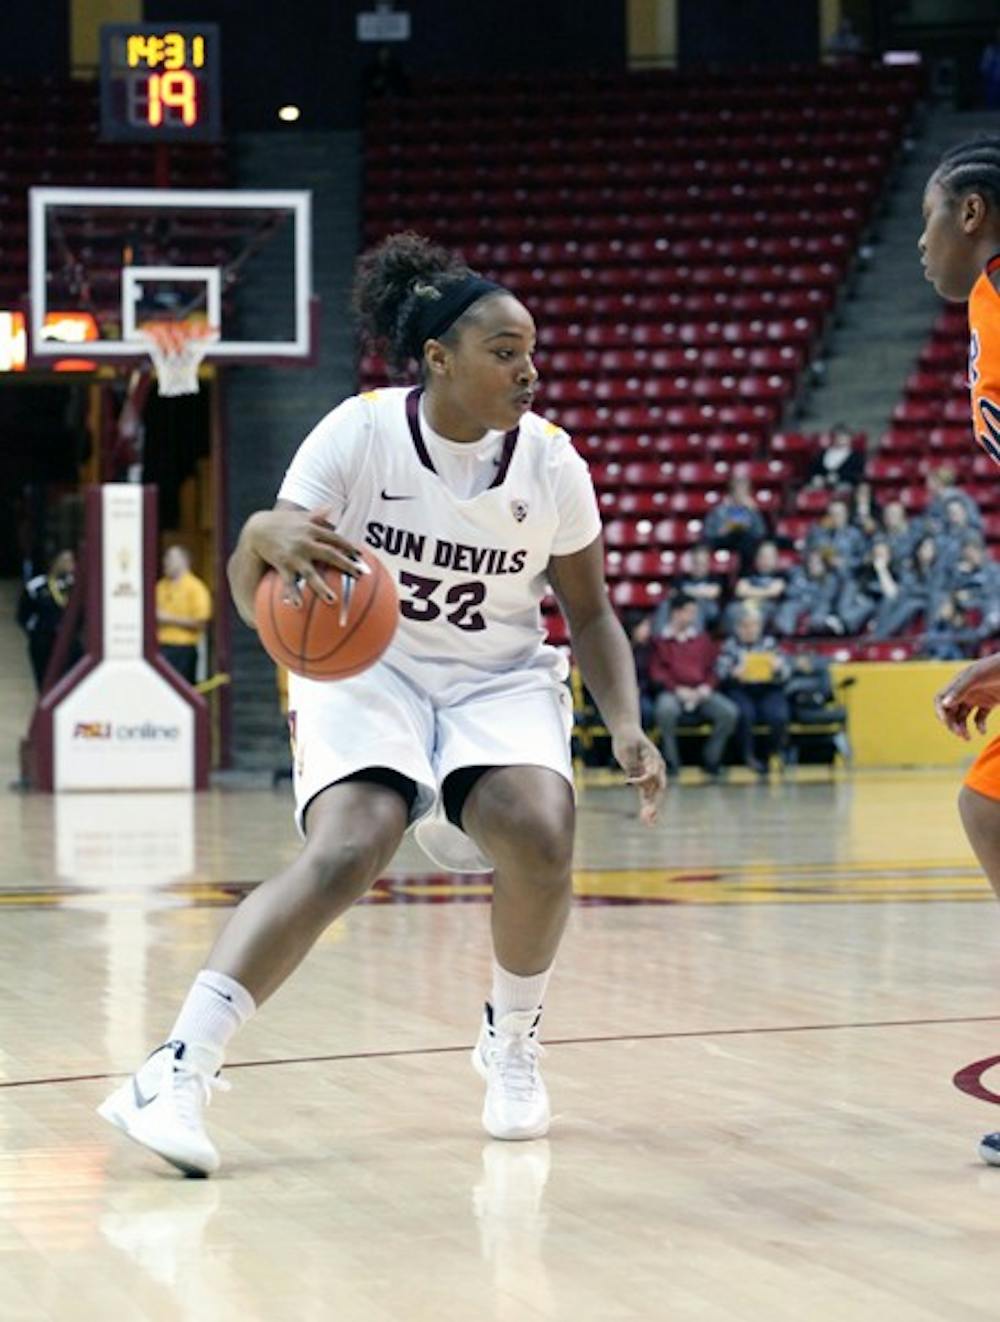 Jada Blackwell dribbles the ball in a game against UTEP on Dec. 28, 2011. The Sun Devils look to snap their two-game losing streak when they visit Utah. (Photo by Beth Easterbrook)